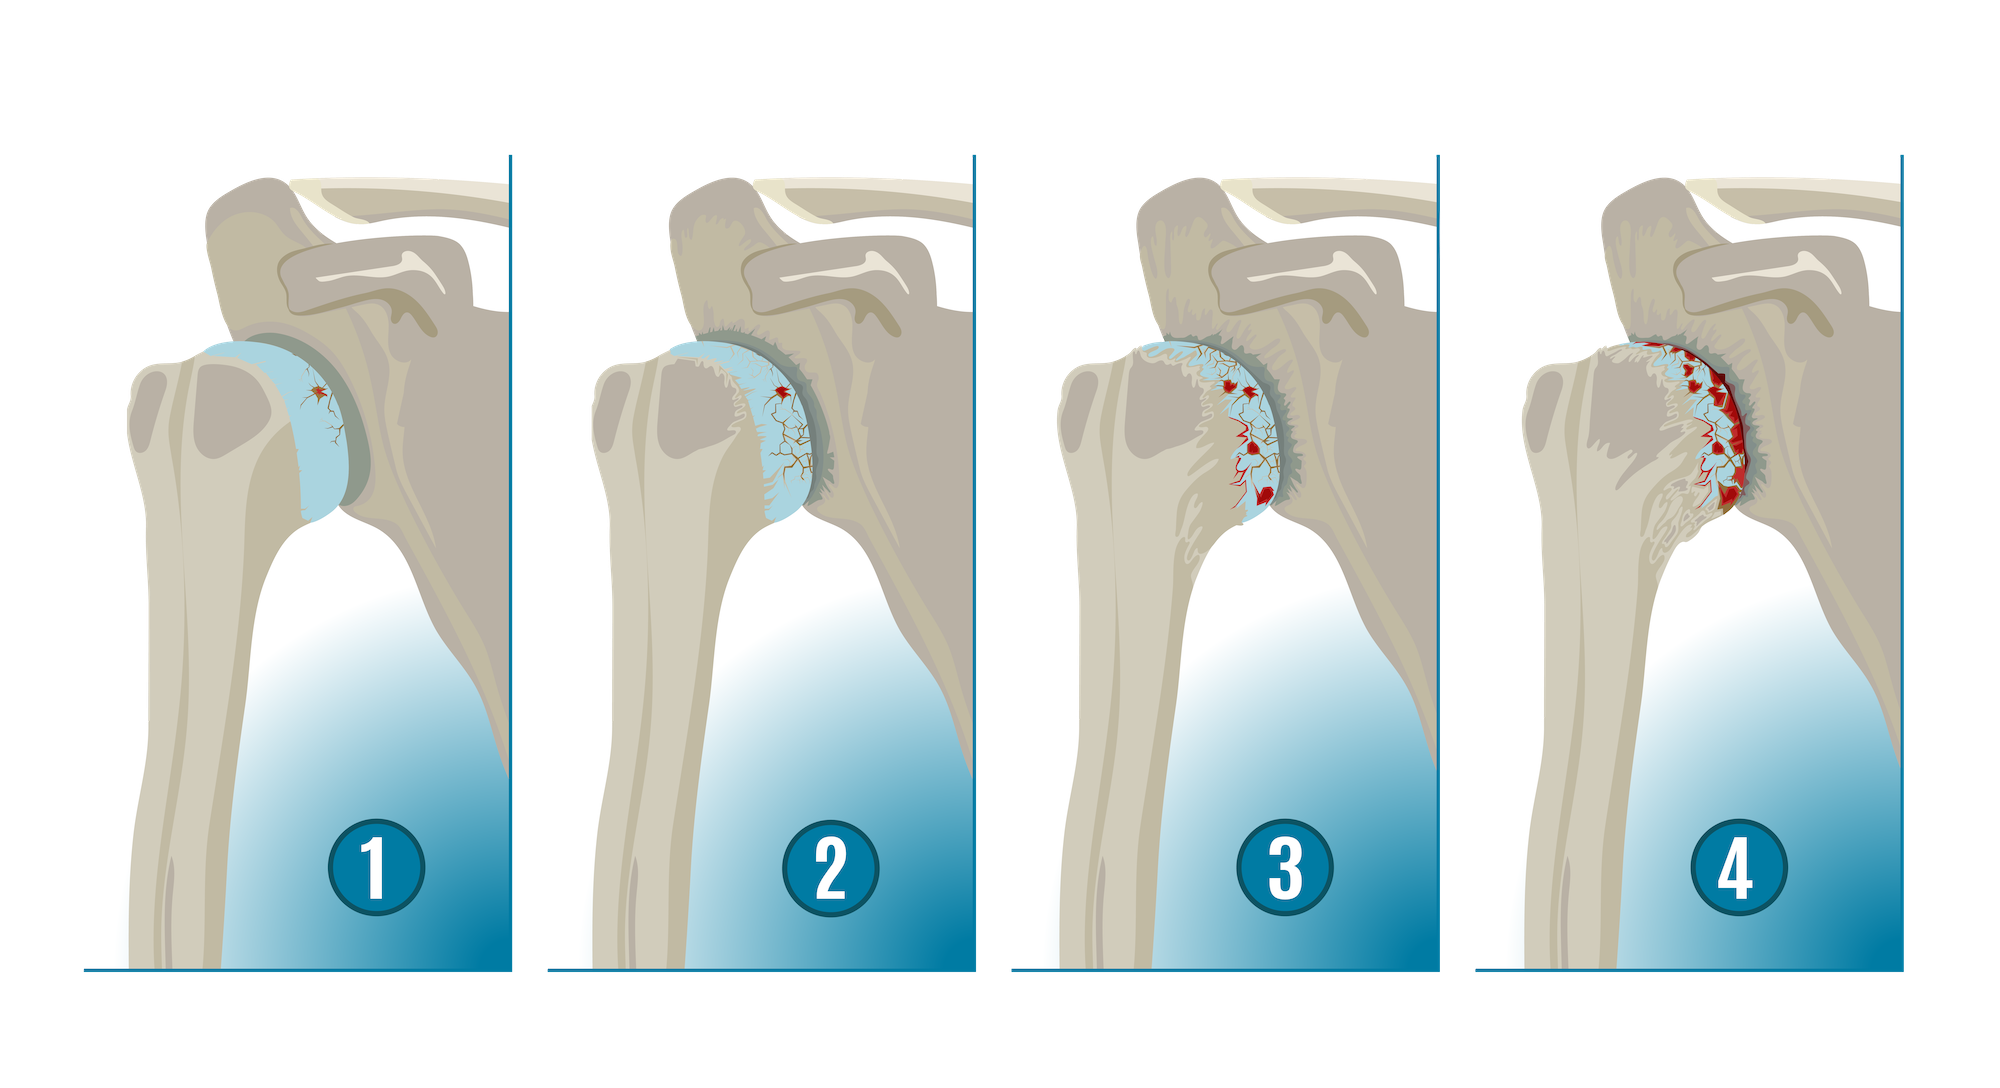 What Causes Arthritis in the Shoulder? Anatomical graphic displaying the steps of shoulder arthrtis